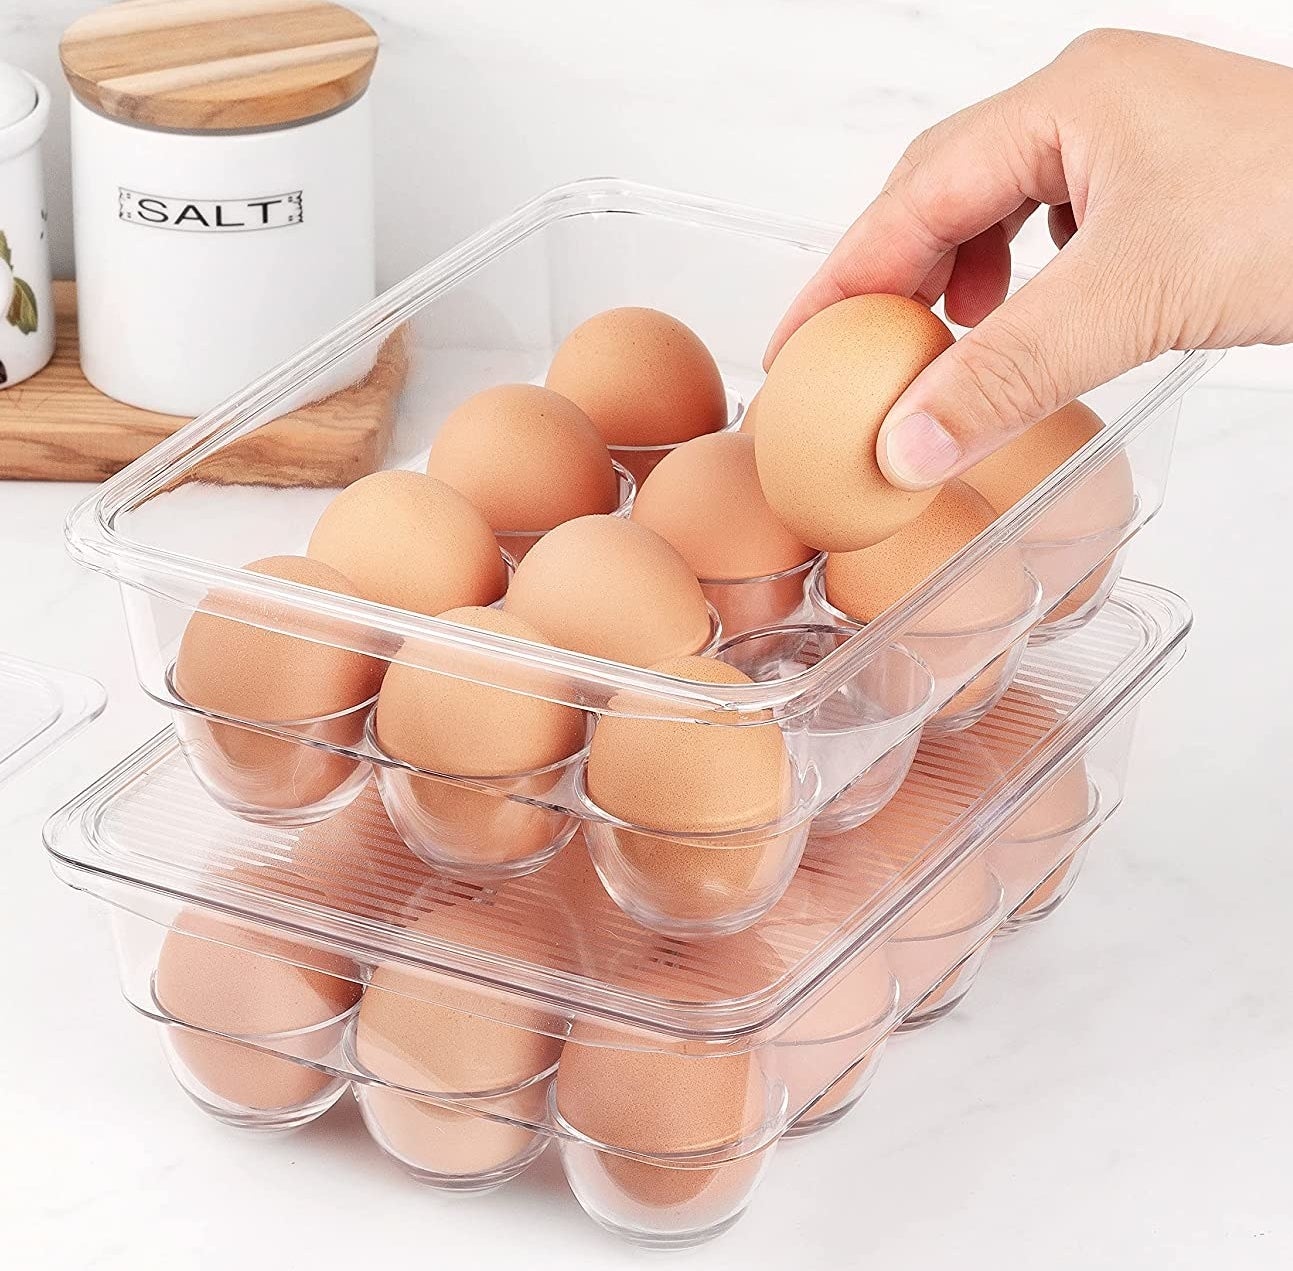 A person putting an egg into an almost-full egg container